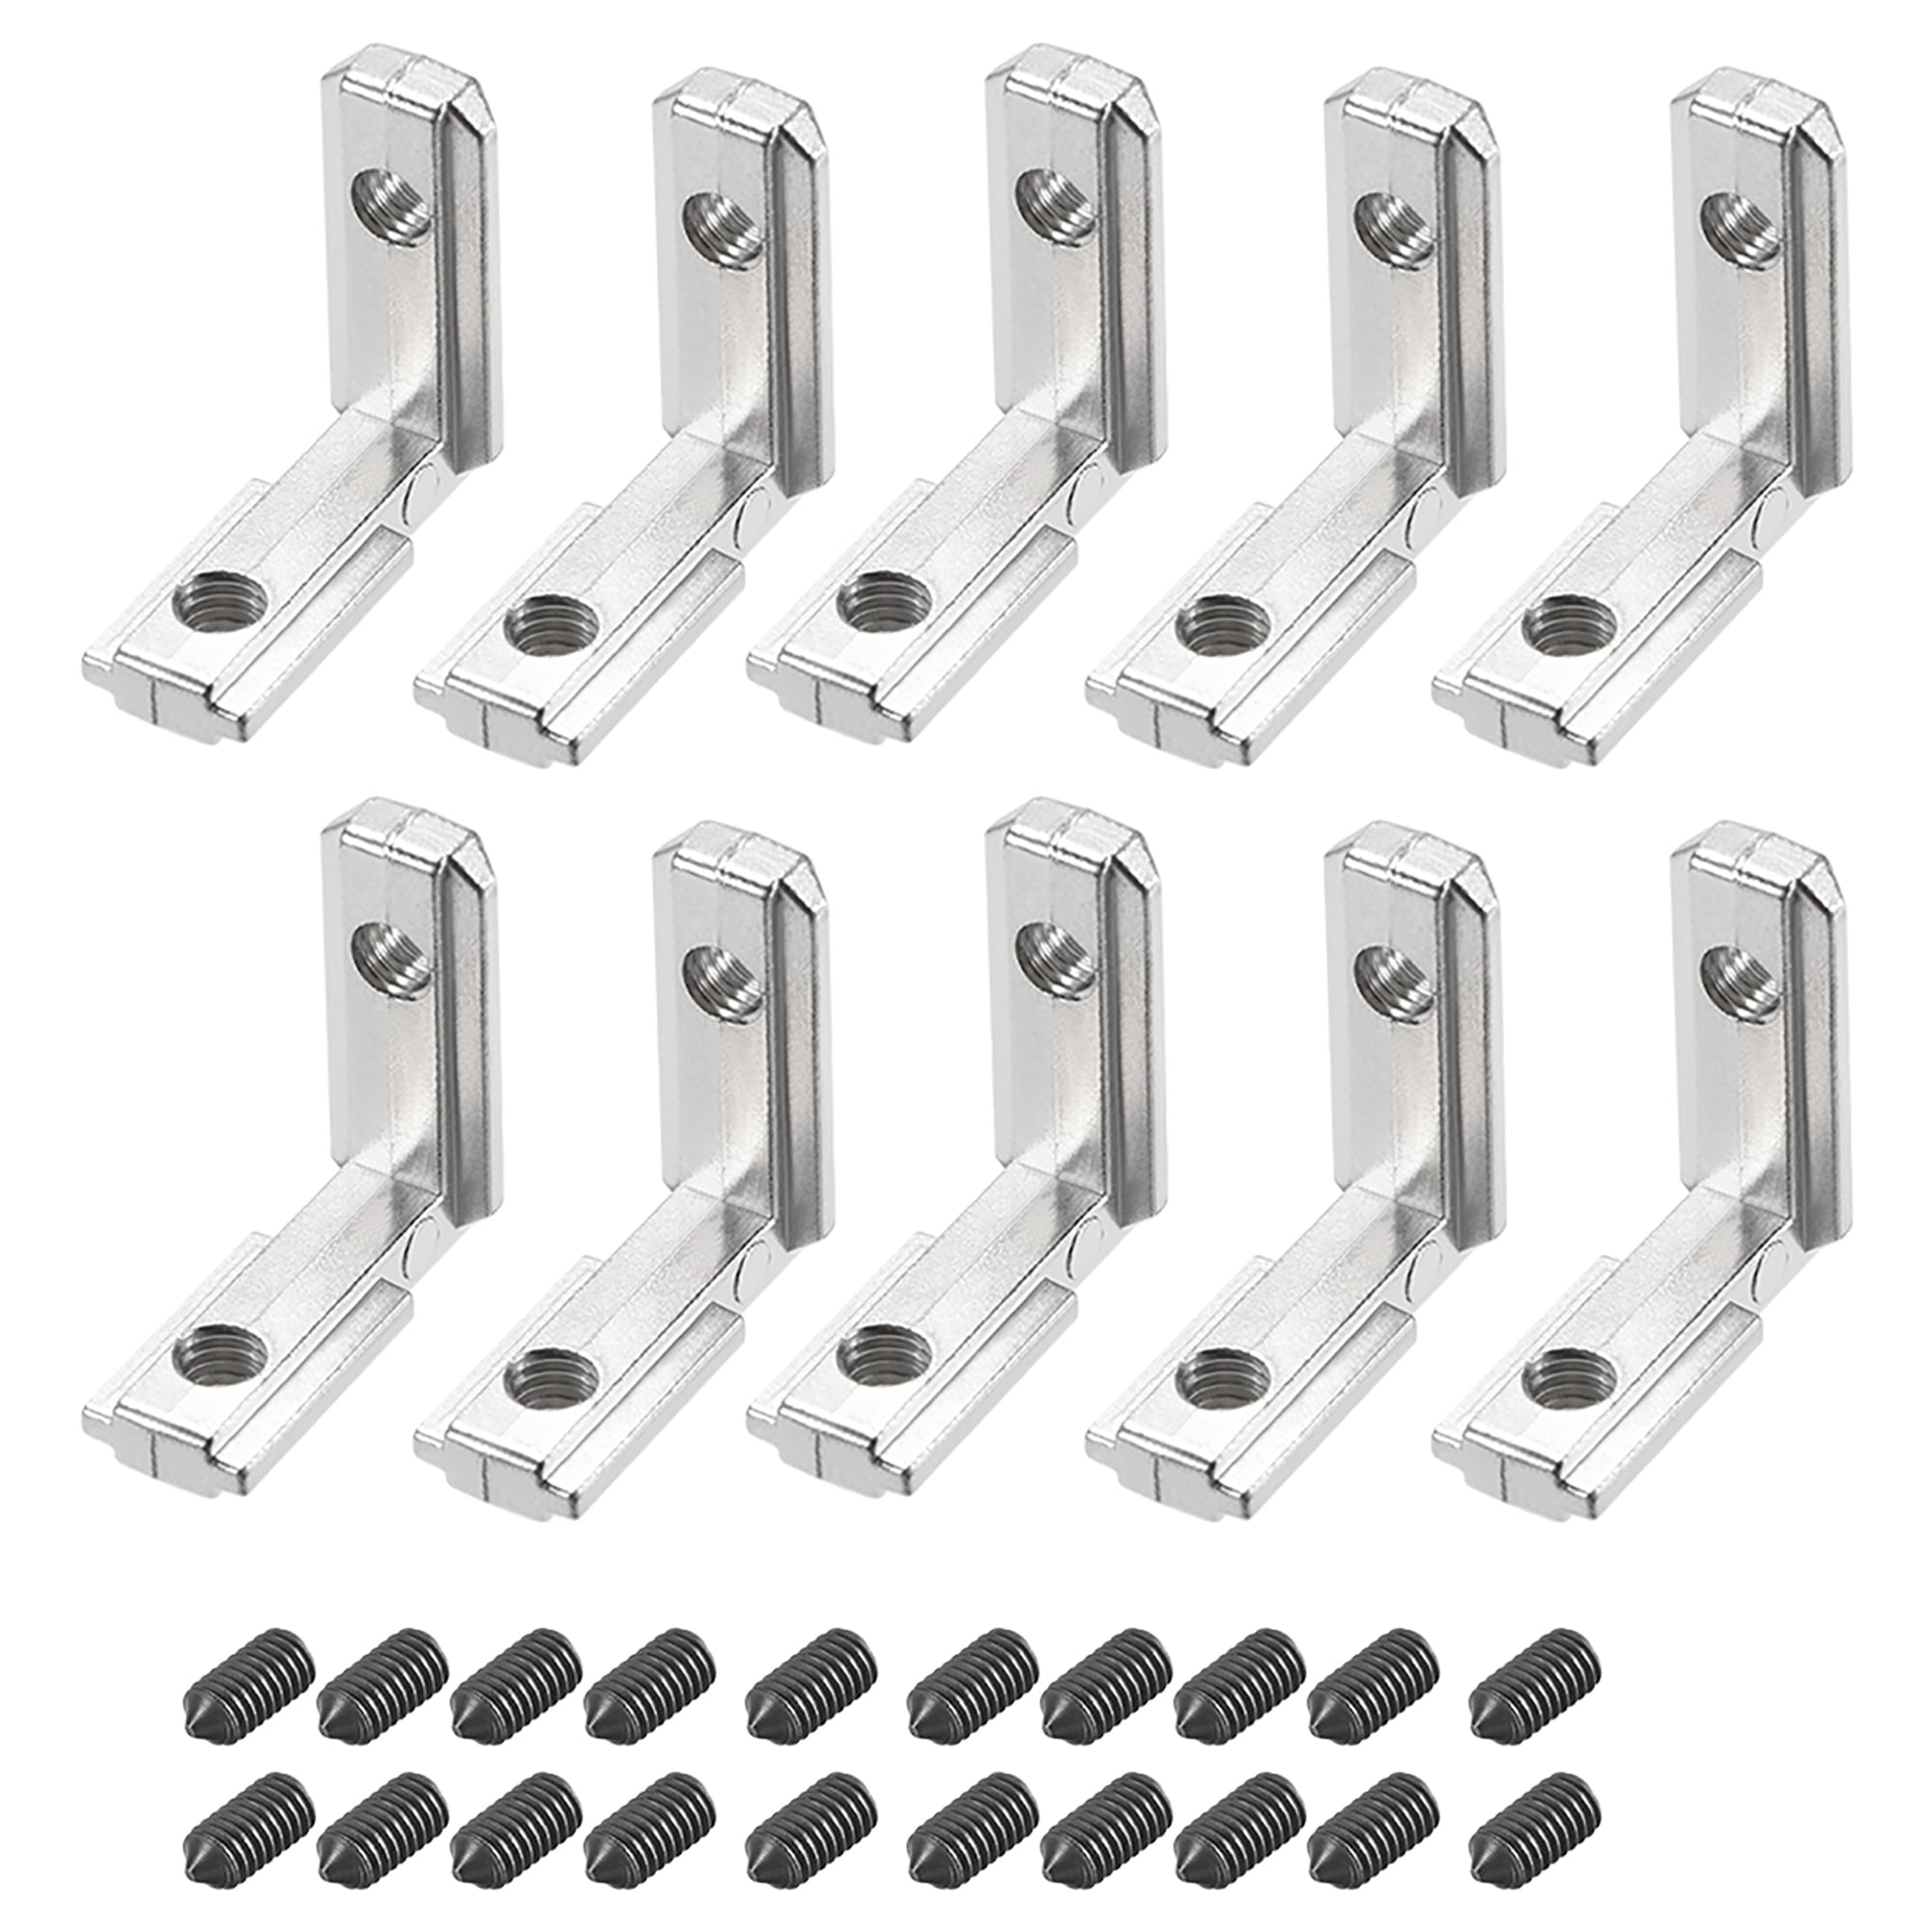 KOOTANS 20pcs/lot 2020 T Slot Aluminum Angle Bracket Interior Joint Bracket for Aluminum Extrusion Profile 2020 Series Slot 6mm with Screws and Wrench 